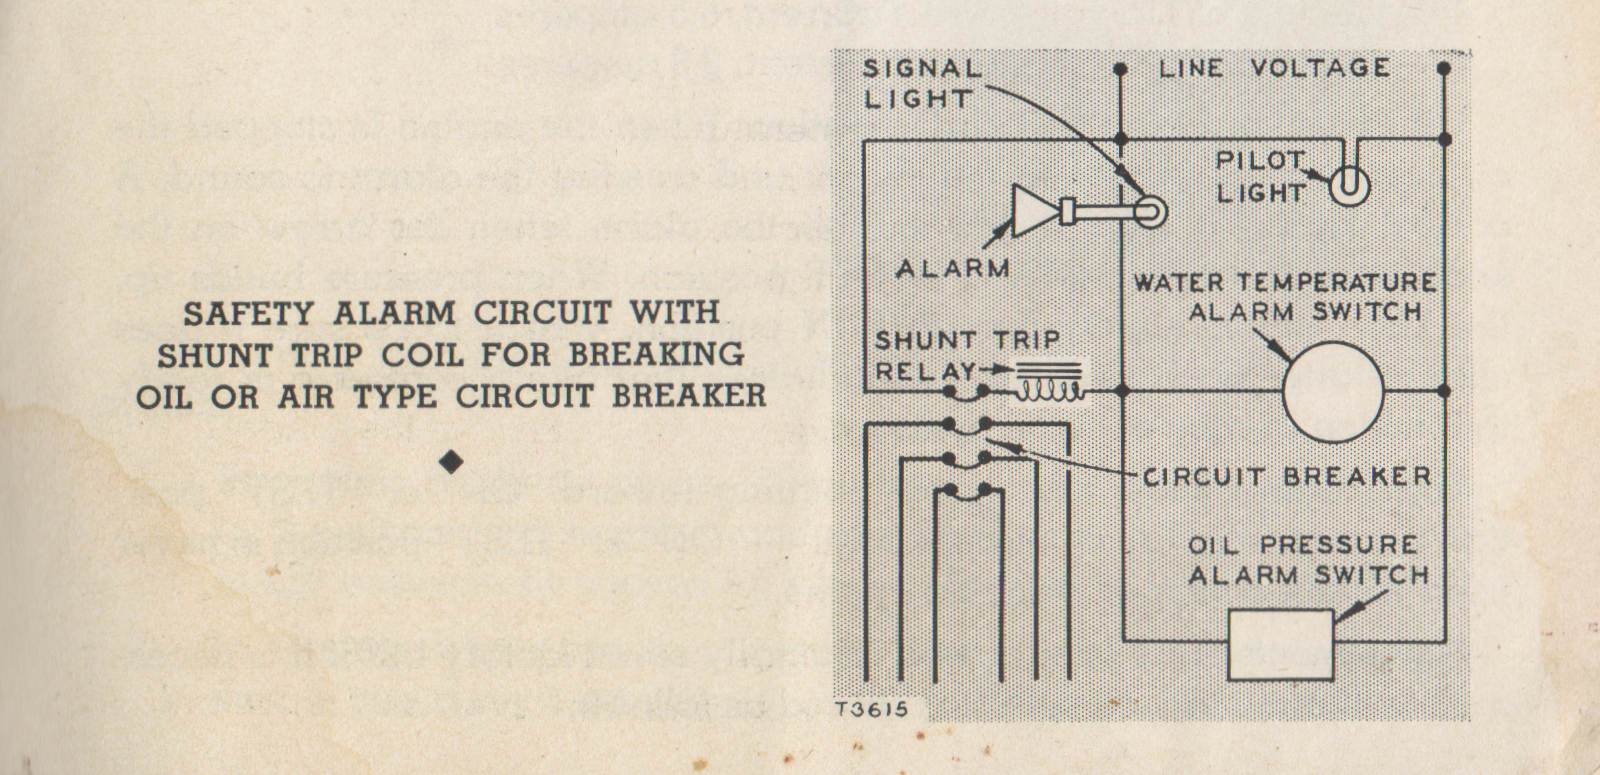 Circuit diagram. Label on the side: Safety alarm circuit with shunt trip coil for breaking oil or air type circuit breaker.